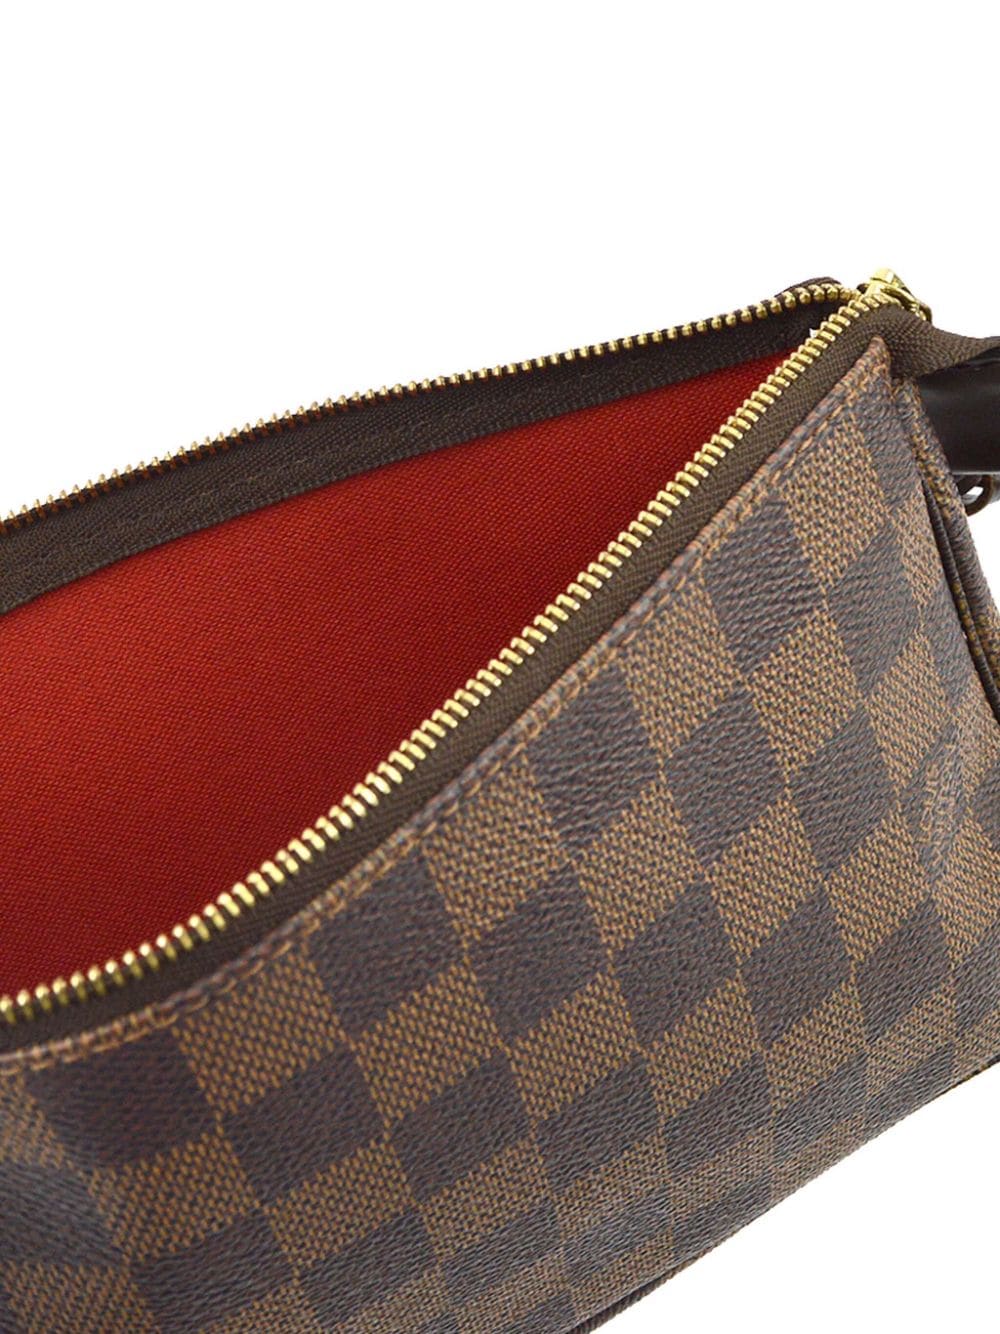 Pre-owned Louis Vuitton Pochette Accessoires 手拿包（2012年典藏款） In Brown